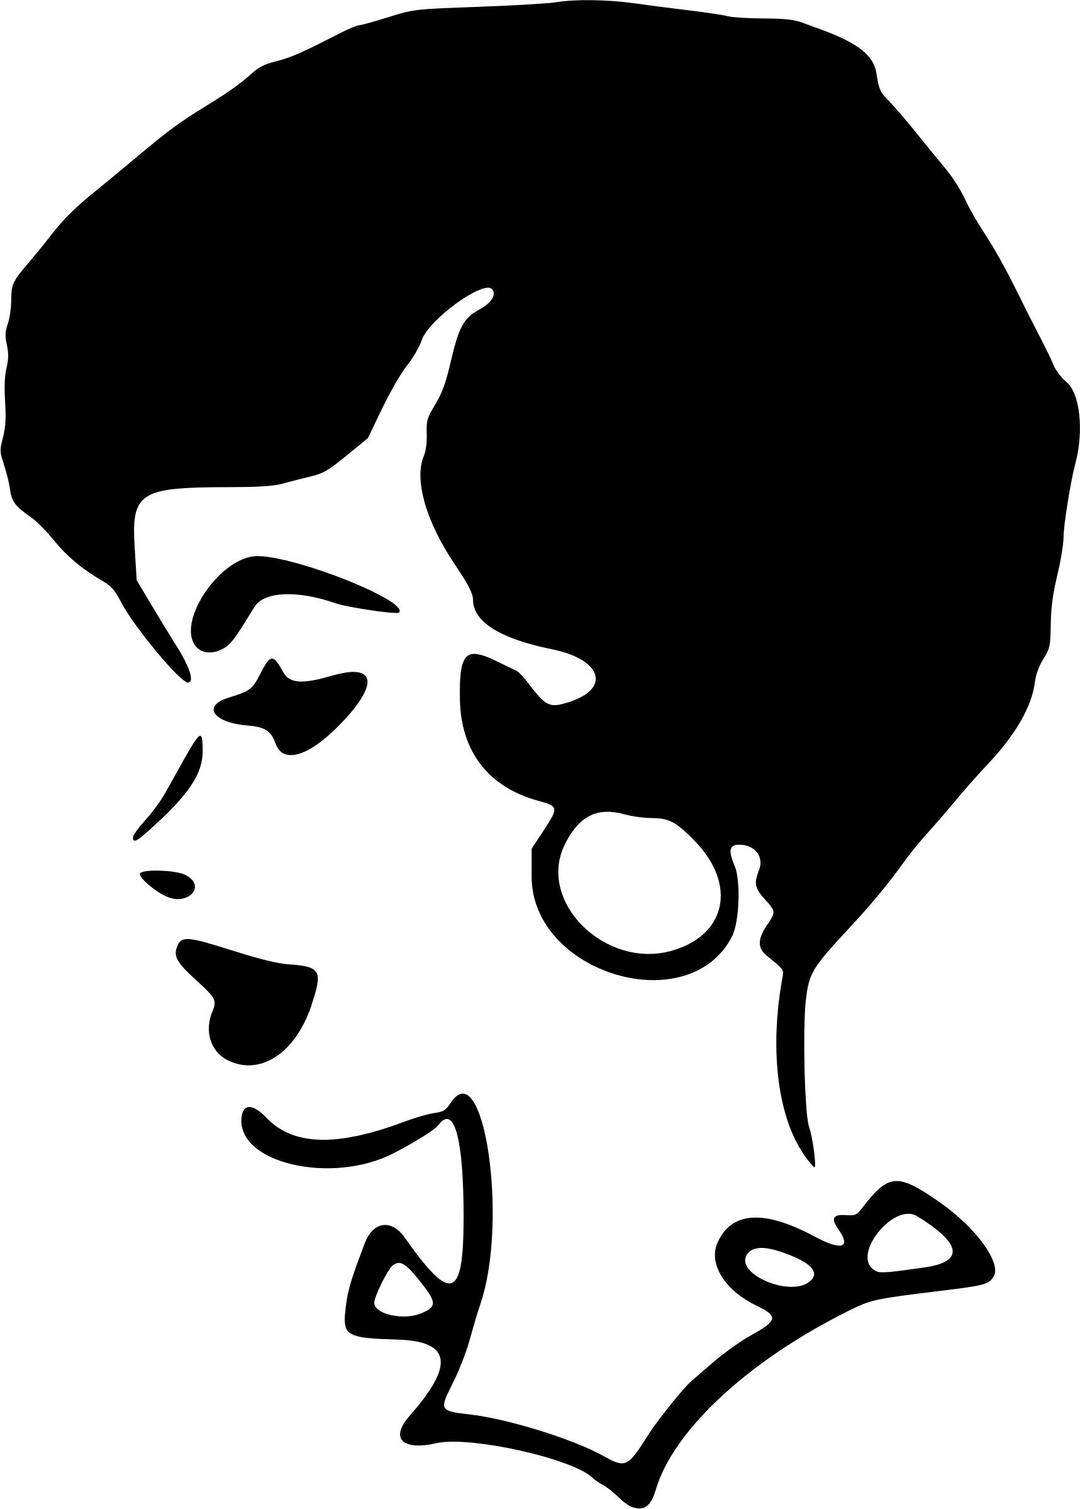 Lady's head in profile 8 png transparent